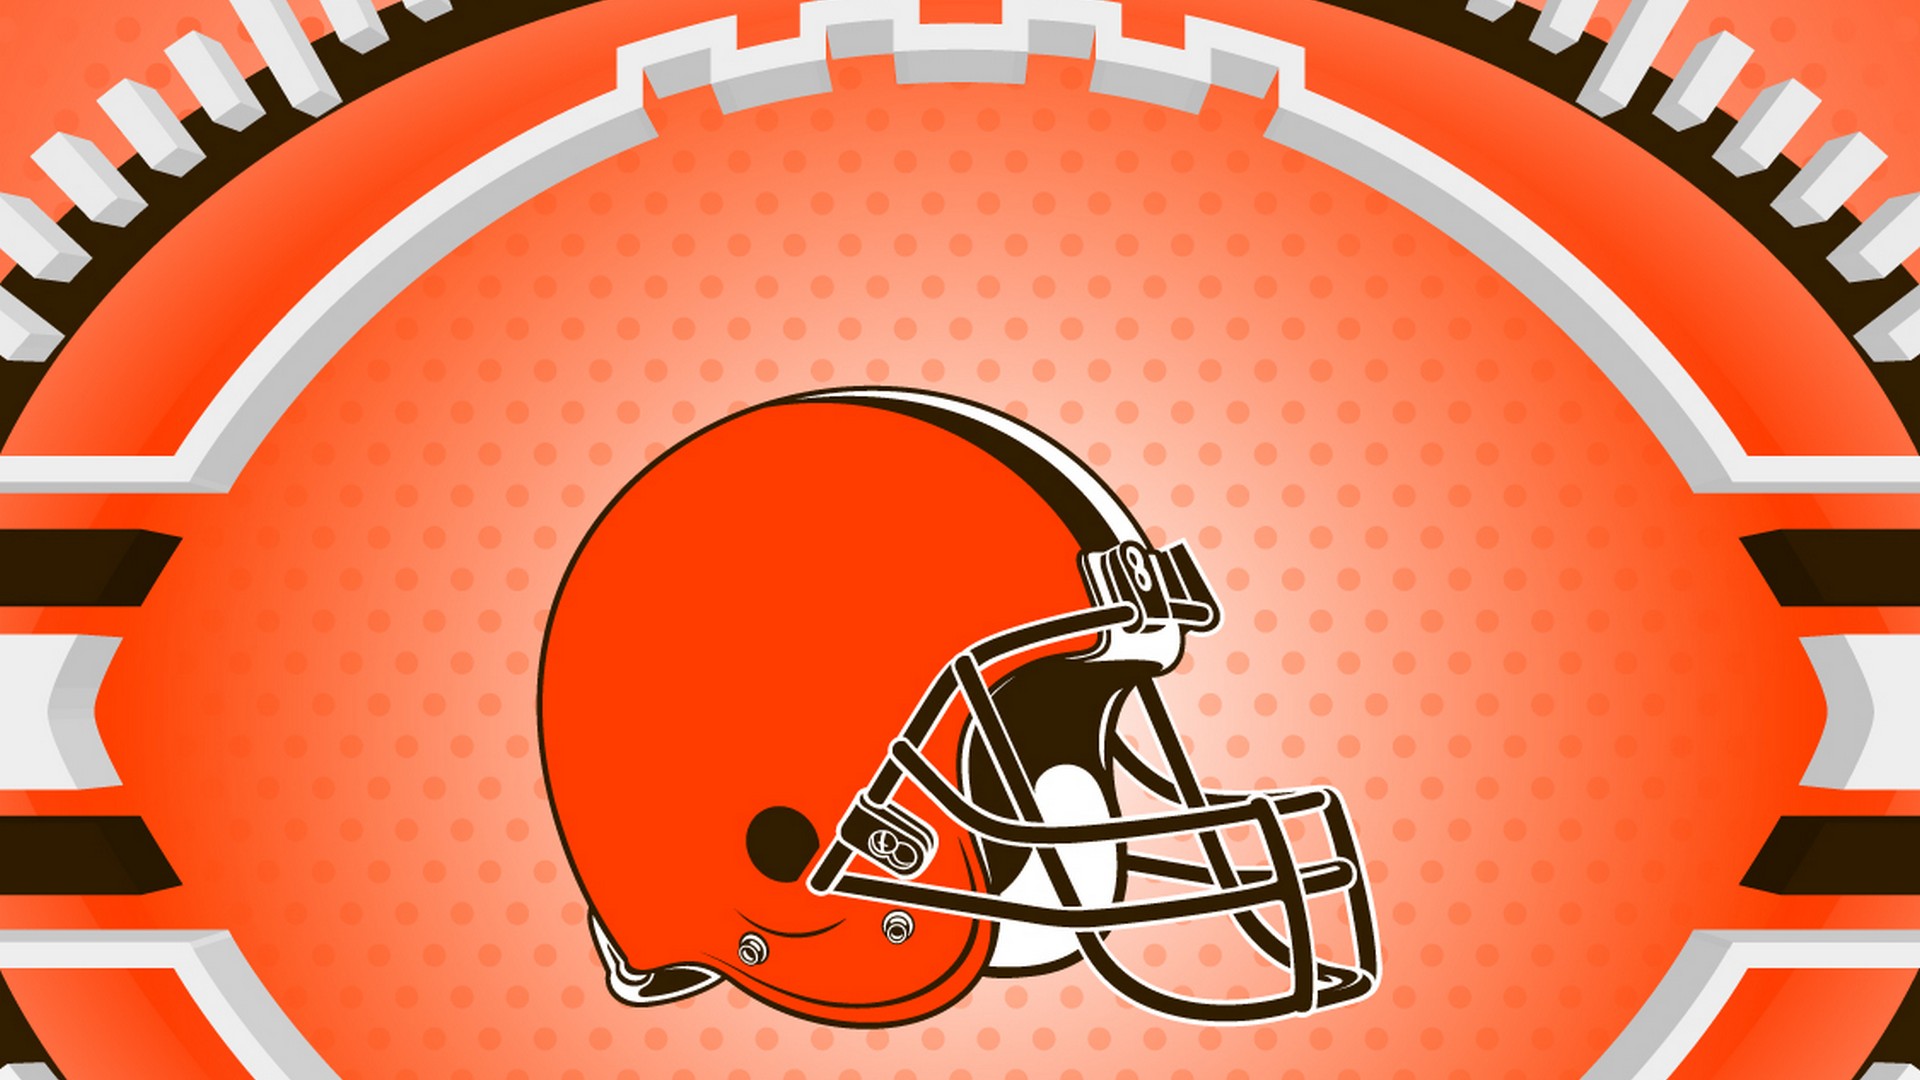 Cleveland Browns Mac Wallpaper With high-resolution 1920X1080 pixel. Download and set as wallpaper for Desktop Computer, Apple iPhone X, XS Max, XR, 8, 7, 6, SE, iPad, Android